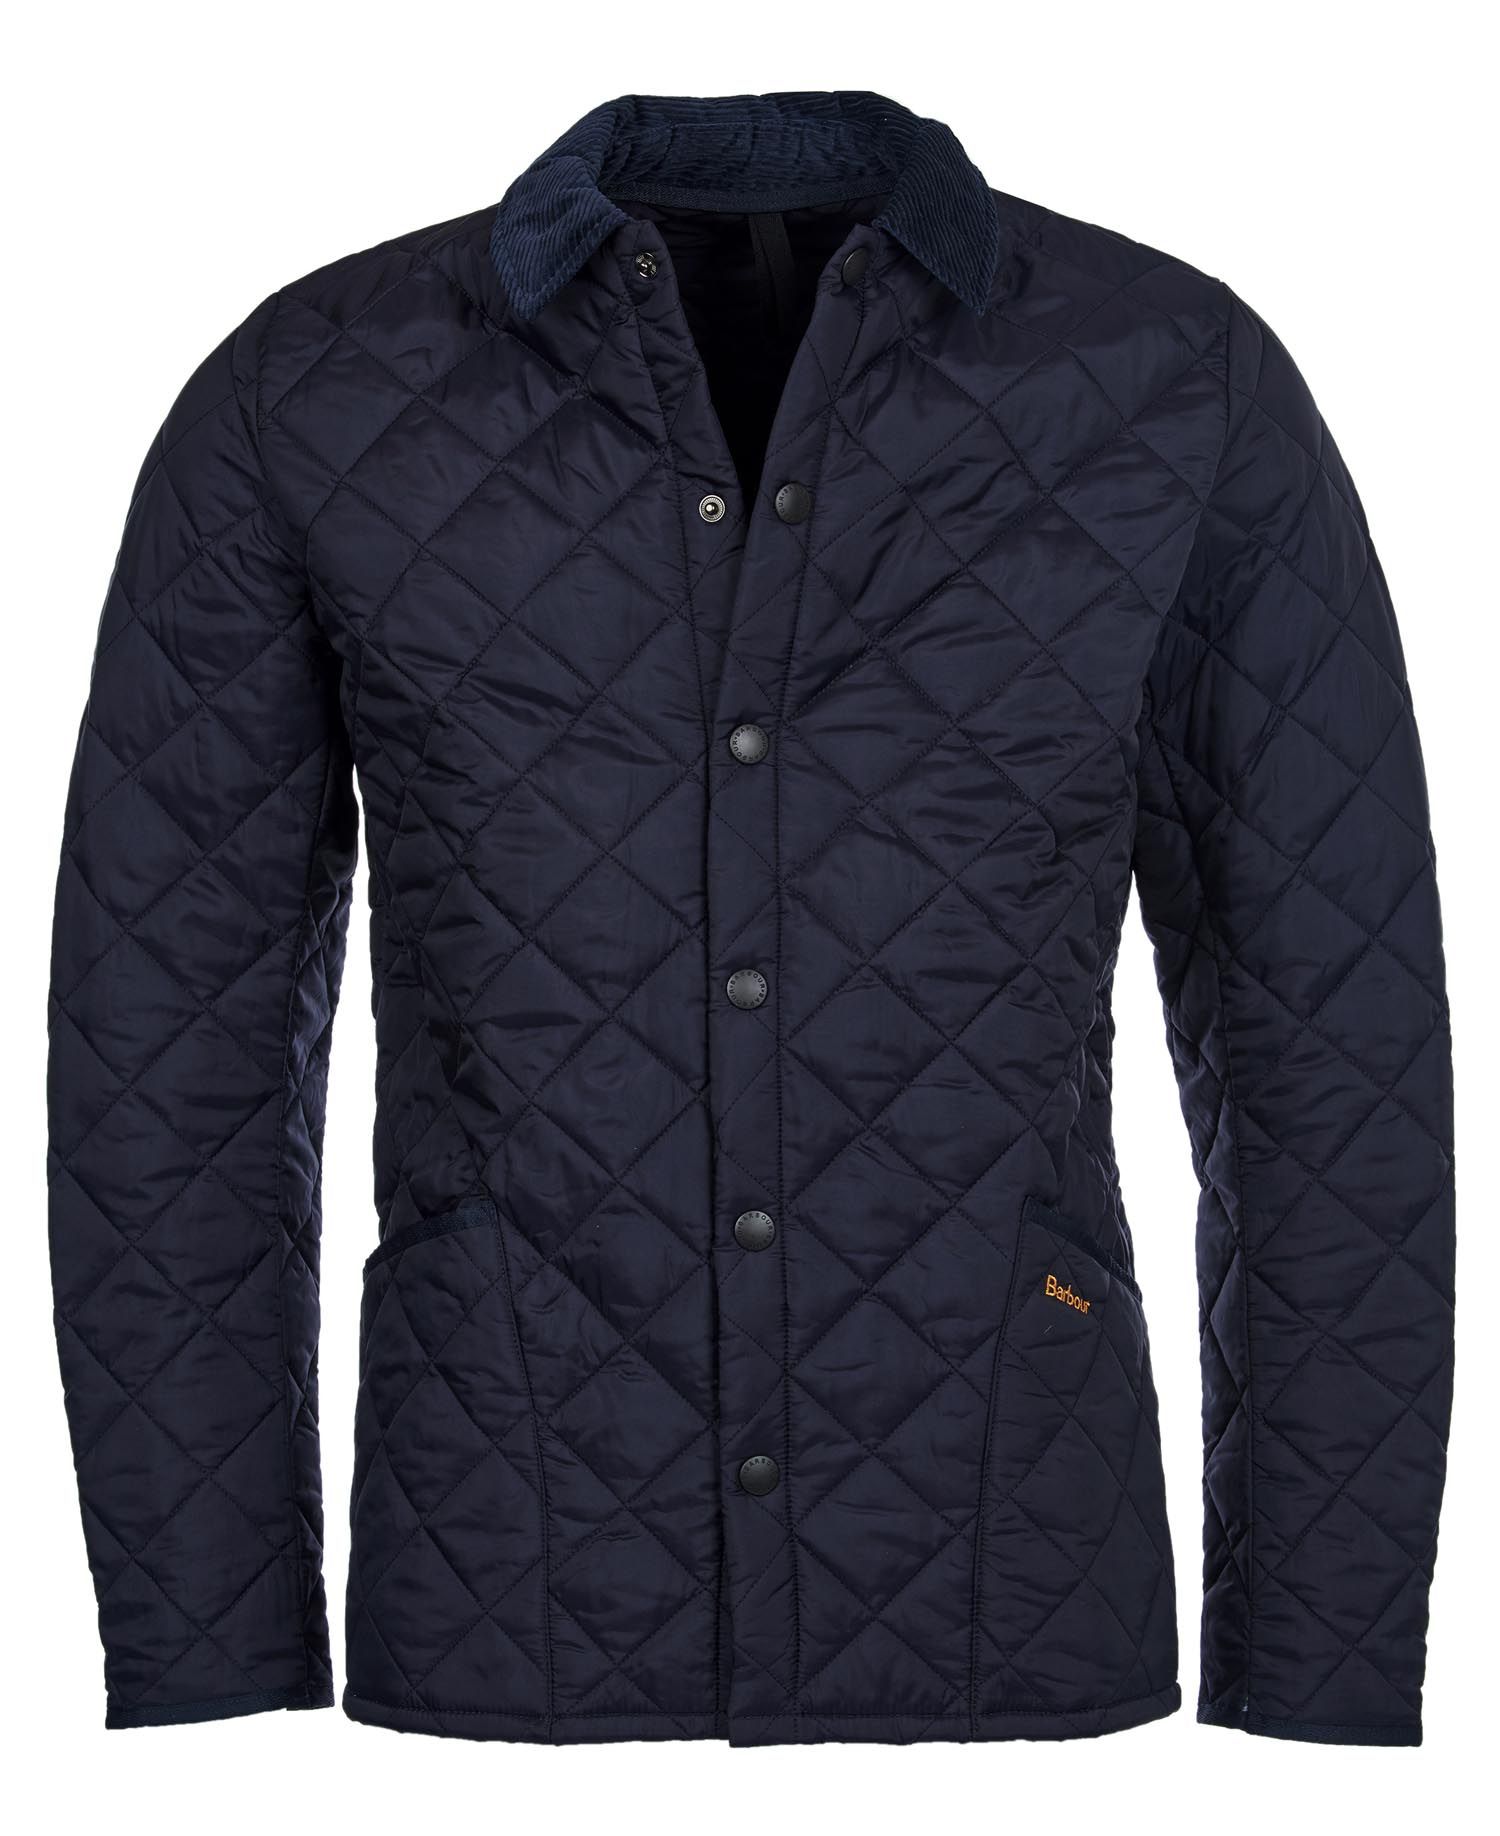 Barbour Men's Heritage Liddesdale Quilted Jacket Navy MQU0240 NY92